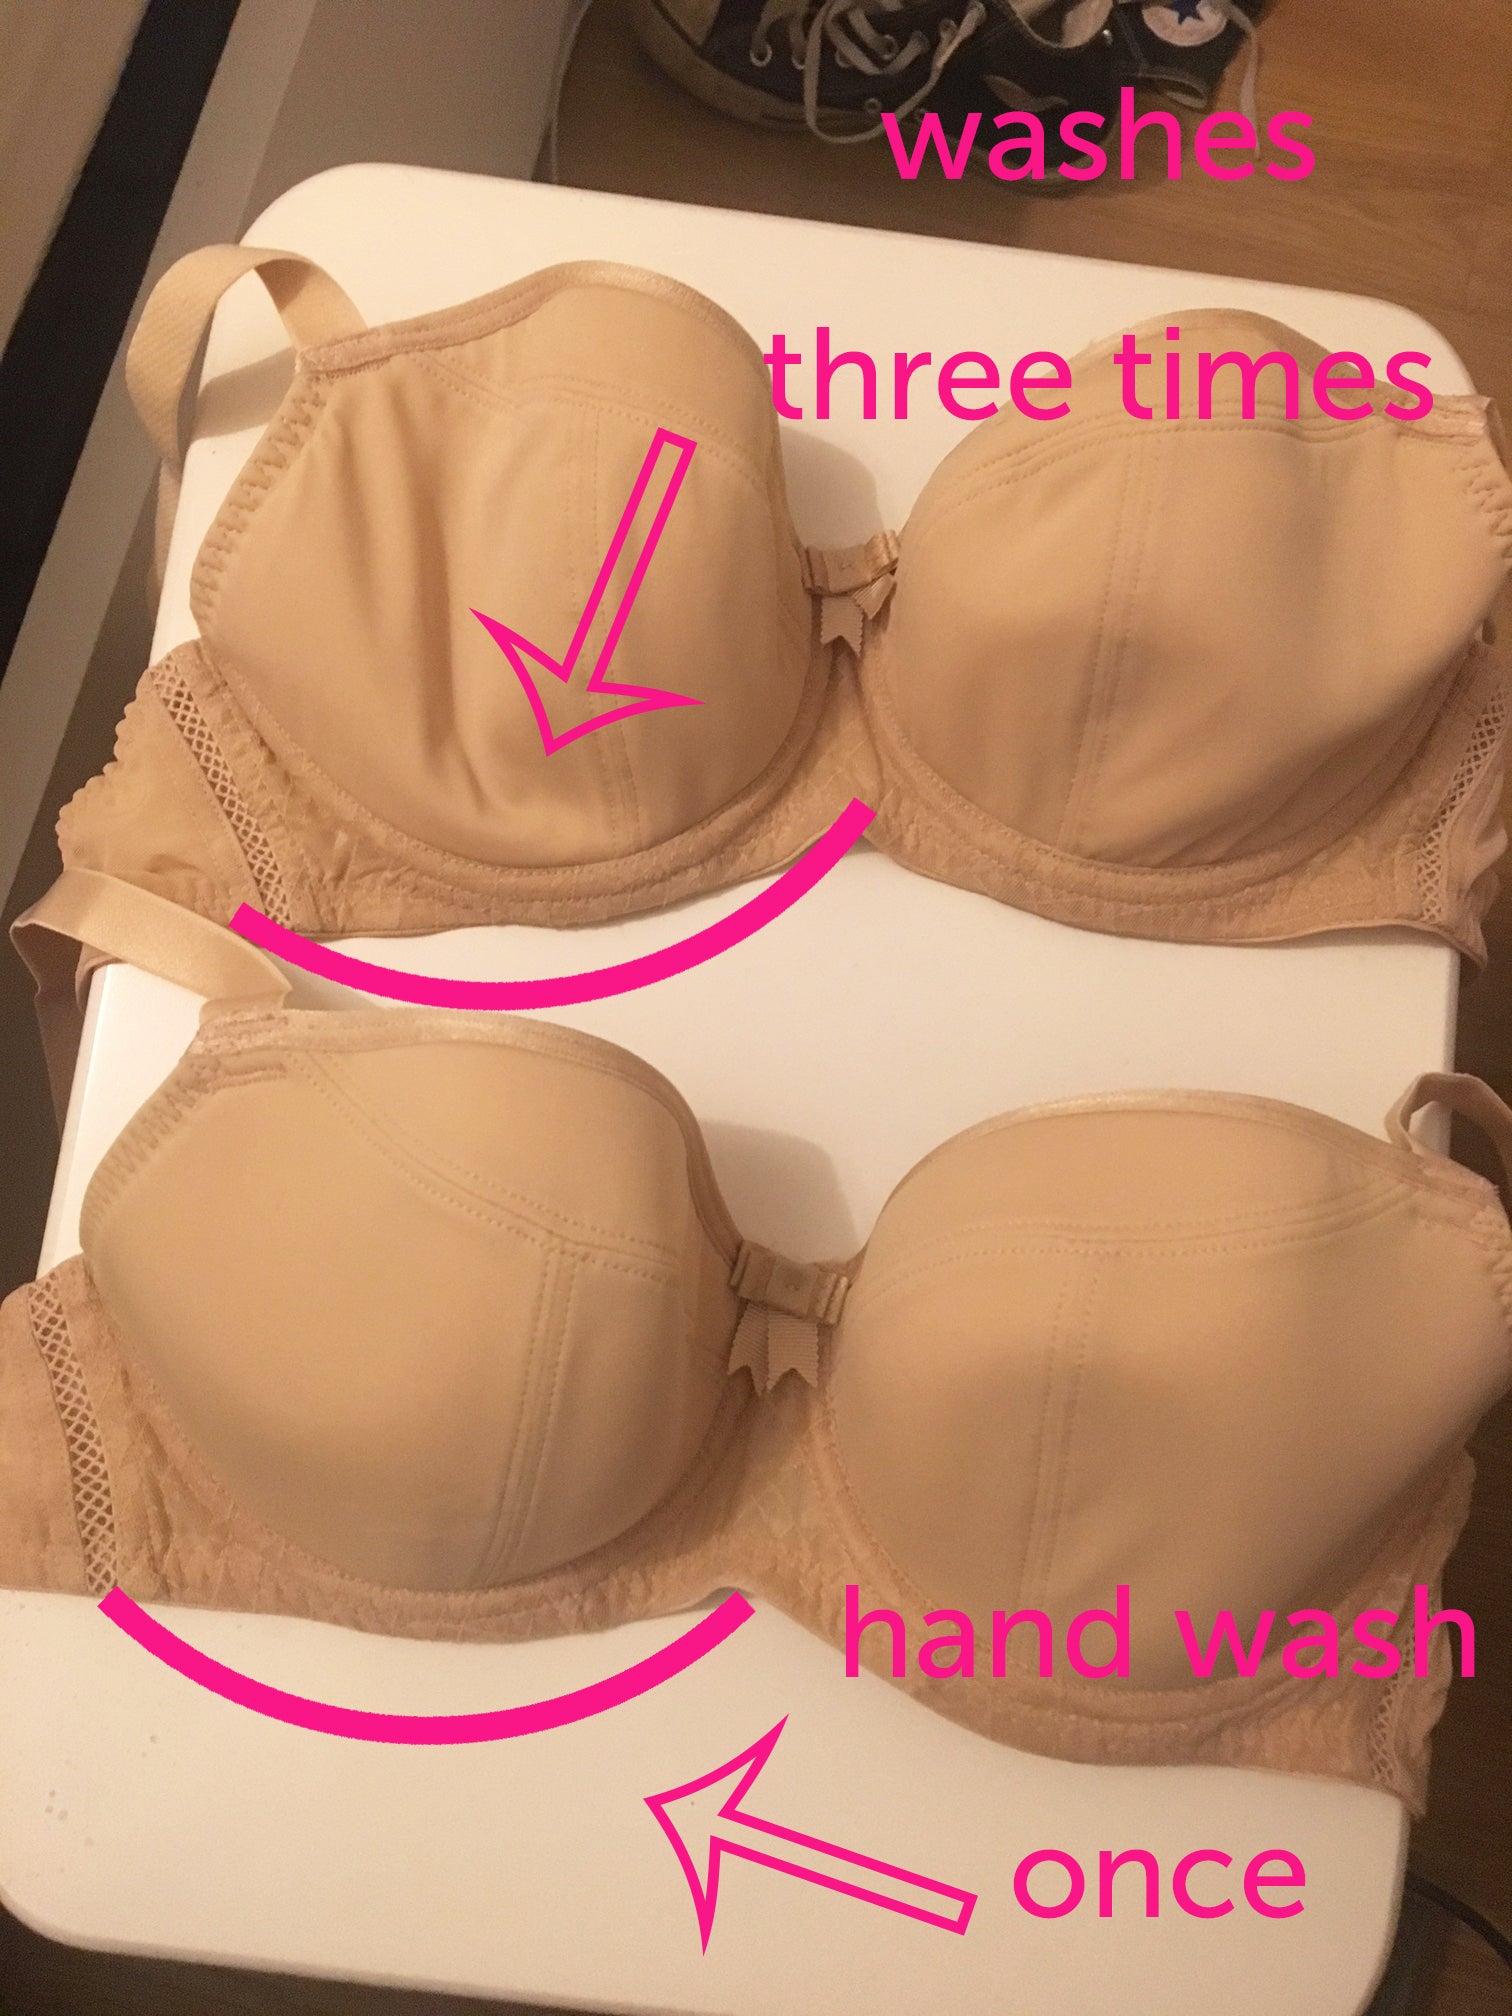 You might think twice about washing your bra...